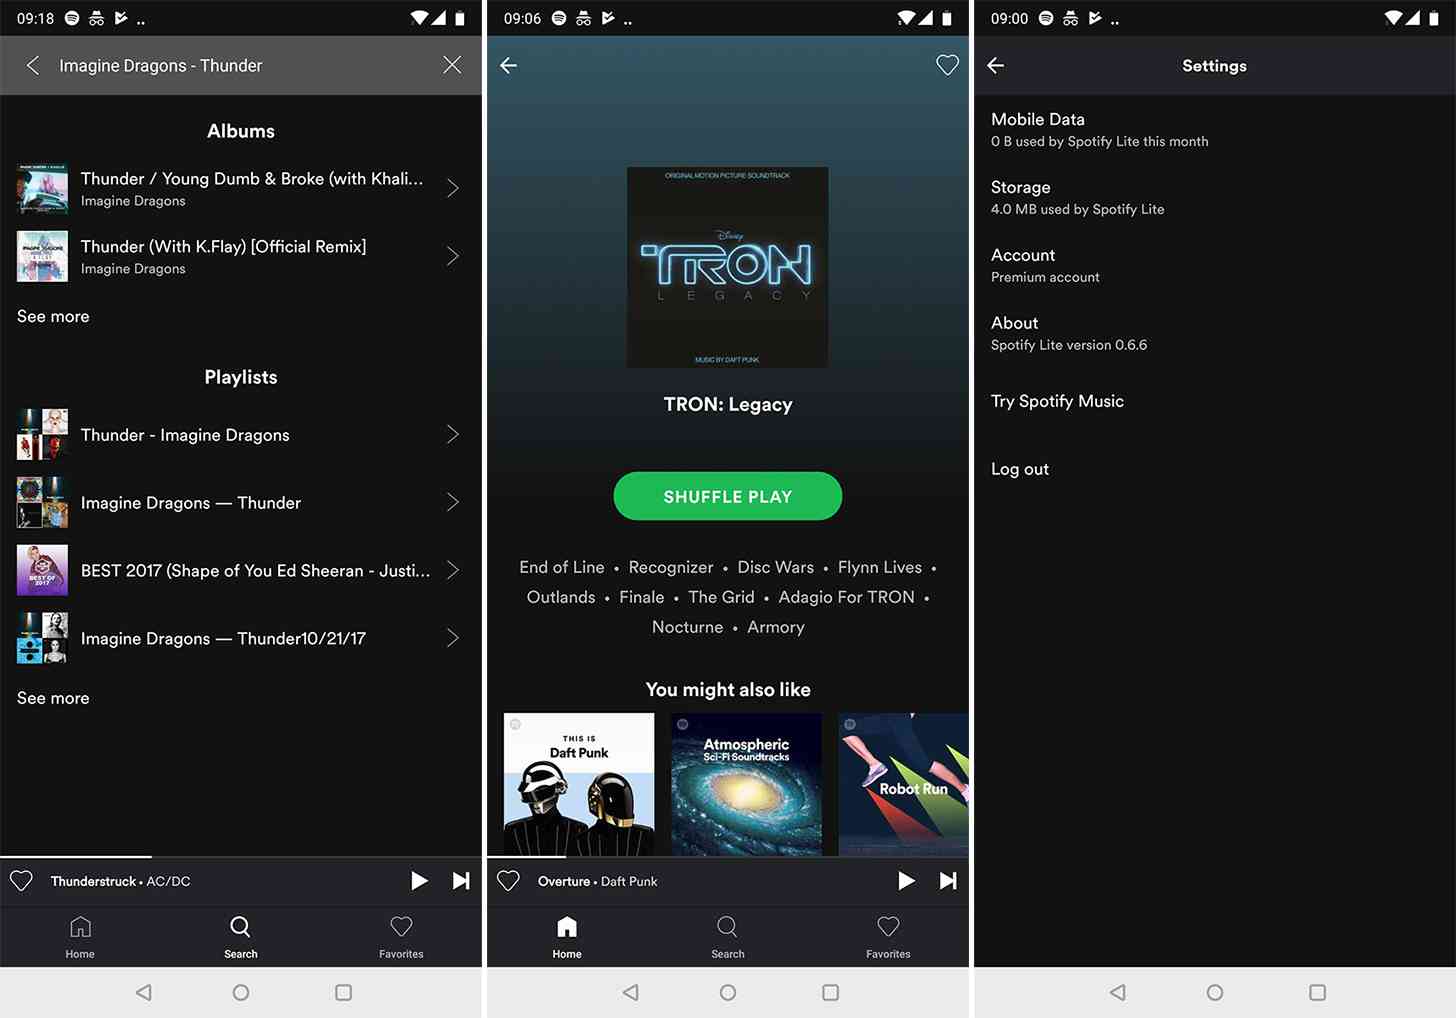 how to download songs on spotify using cellular data